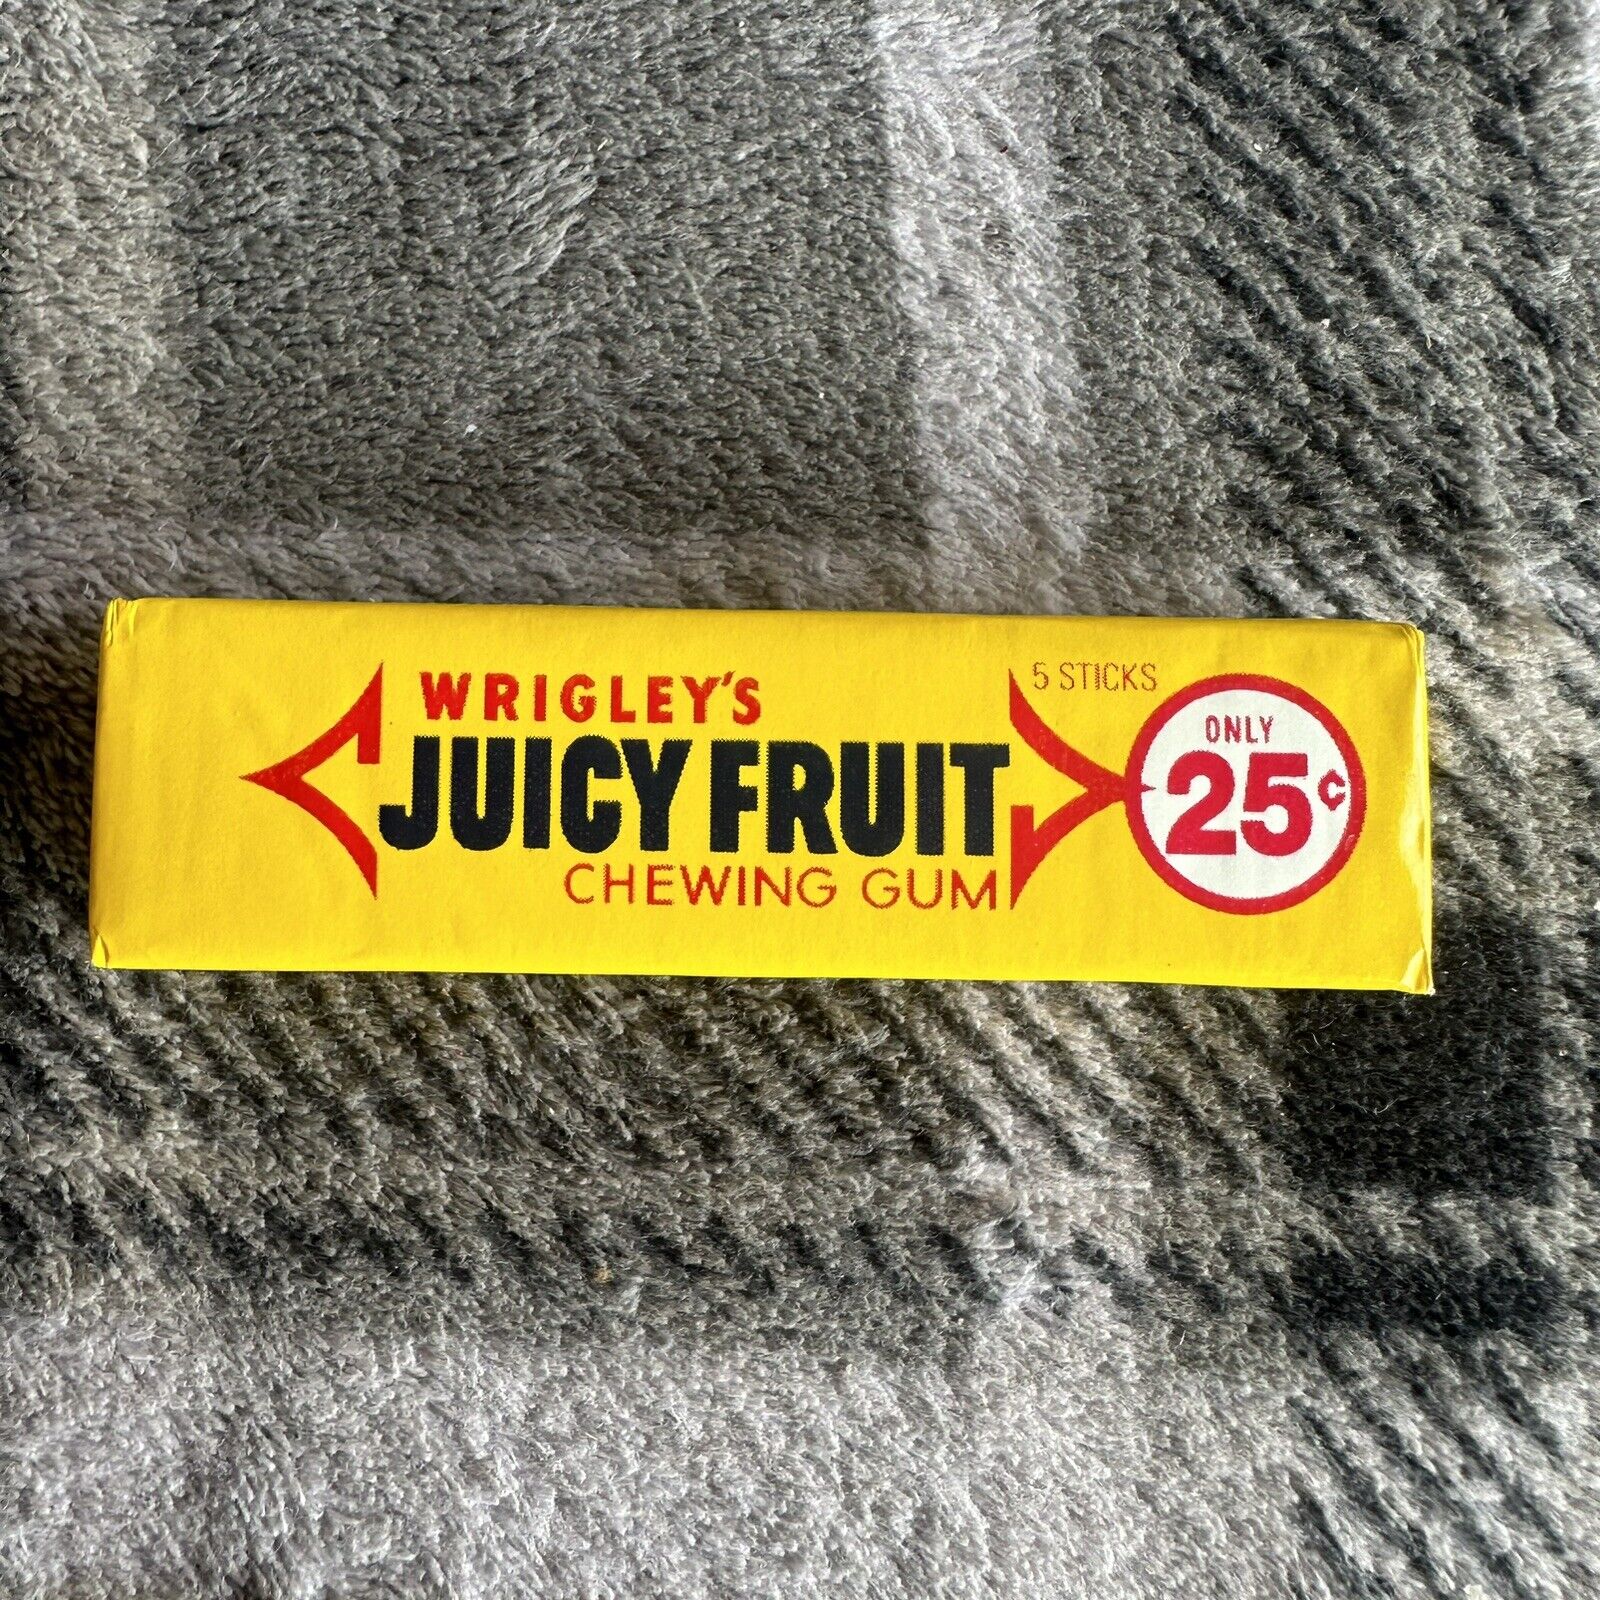 RARE Vintage WRIGLEY\'S JUICY FRUIT Chewing Gum 5 Sticks Candy 1991 25 Cents NOS